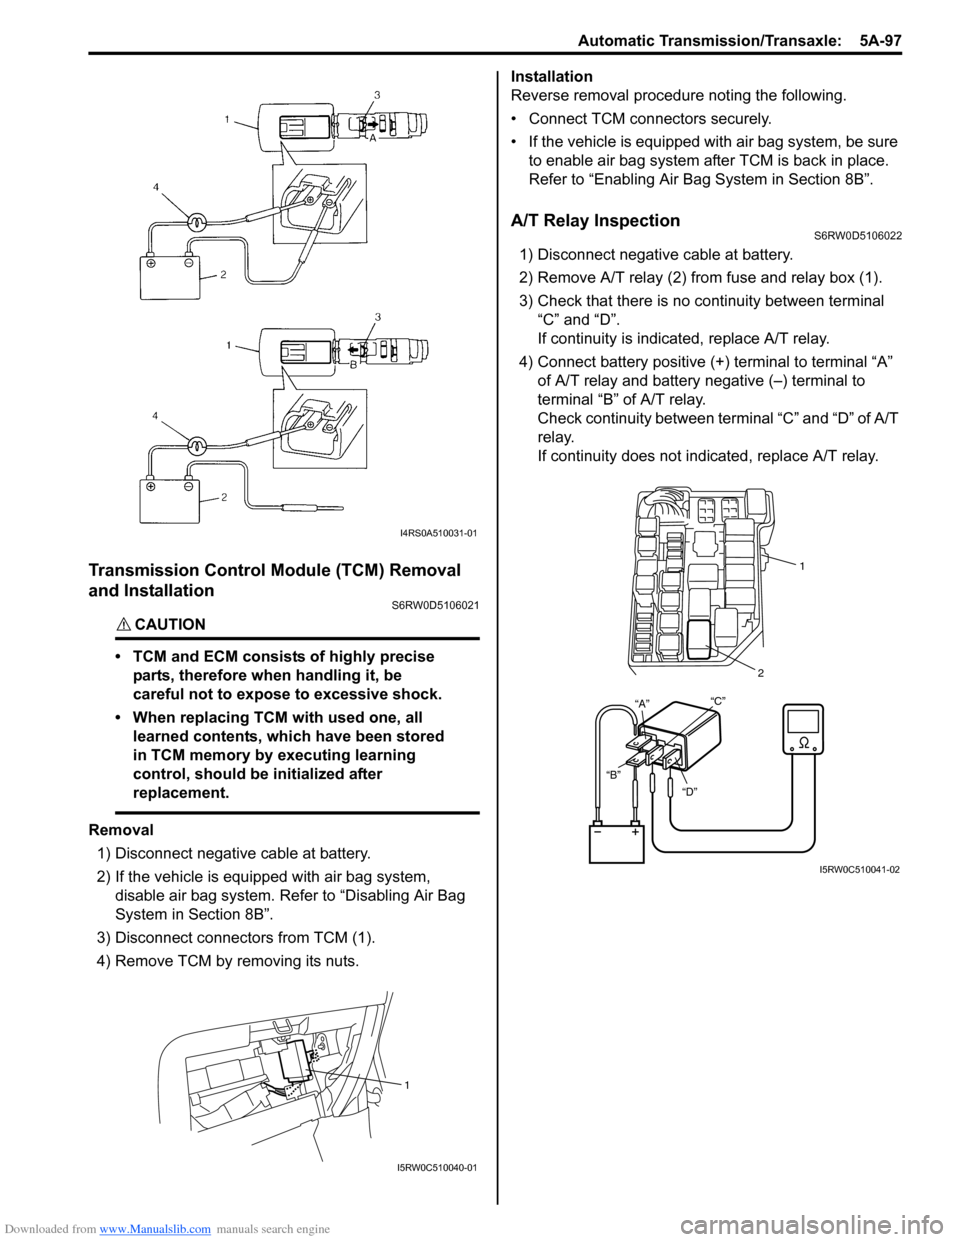 SUZUKI SX4 2006 1.G Service Workshop Manual Downloaded from www.Manualslib.com manuals search engine Automatic Transmission/Transaxle:  5A-97
Transmission Control Module (TCM) Removal 
and Installation
S6RW0D5106021
CAUTION! 
• TCM and ECM co